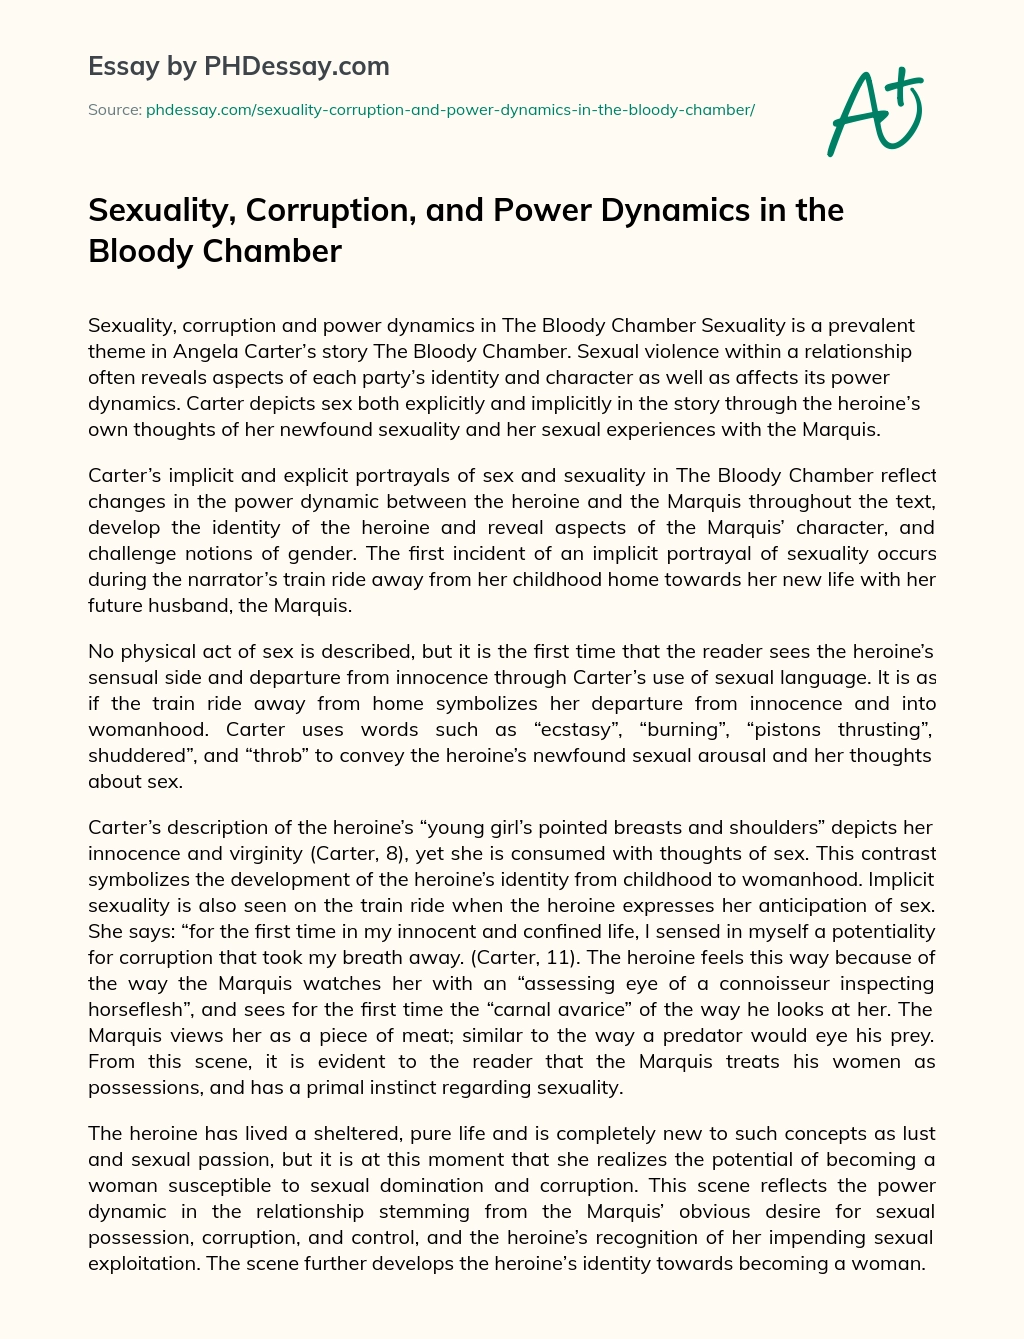 Sexuality, Corruption, and Power Dynamics in the Bloody Chamber essay